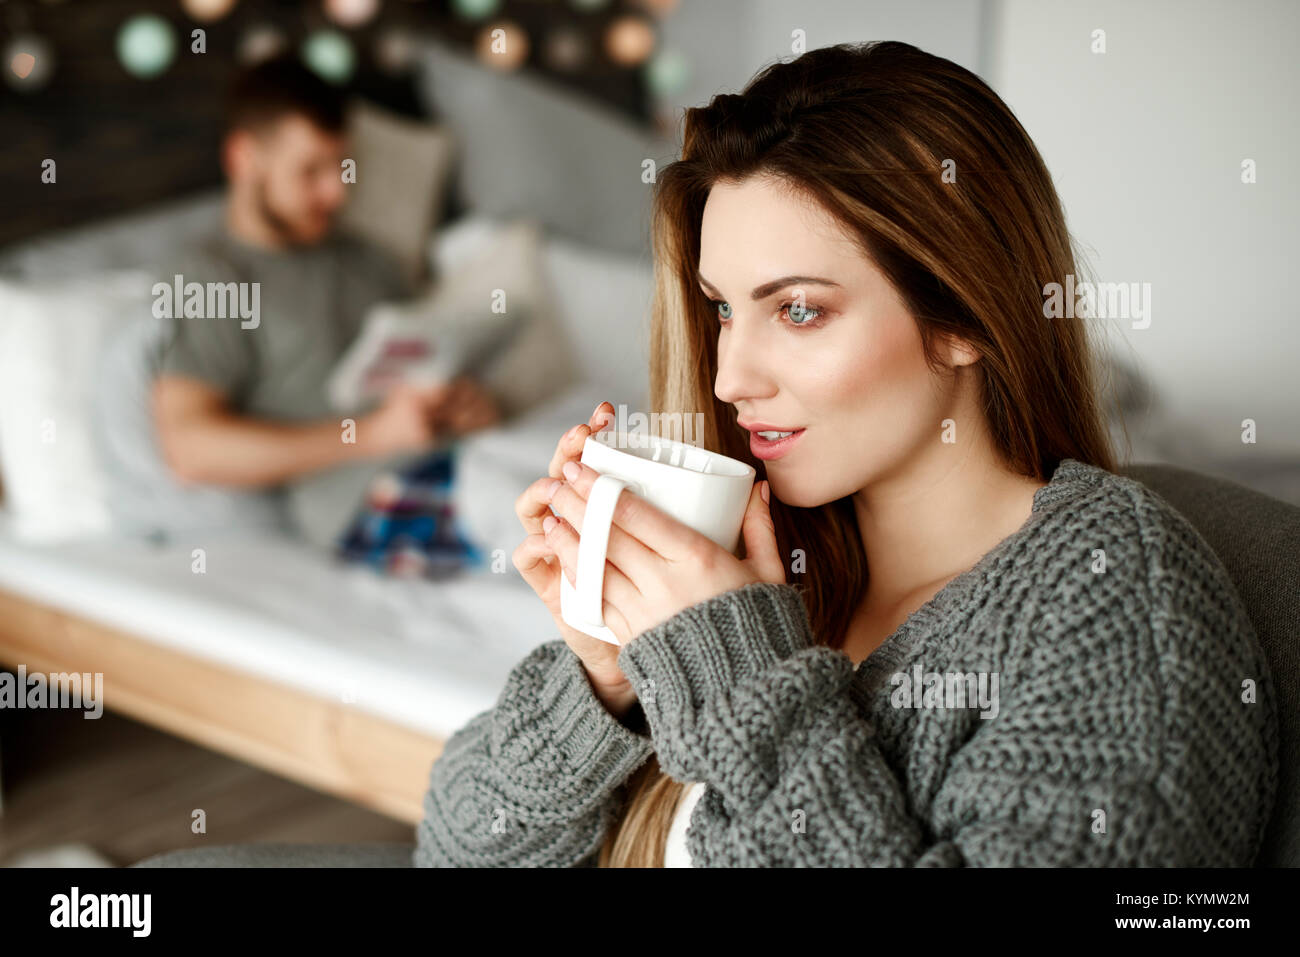 Woman with coffee starting her day Stock Photo